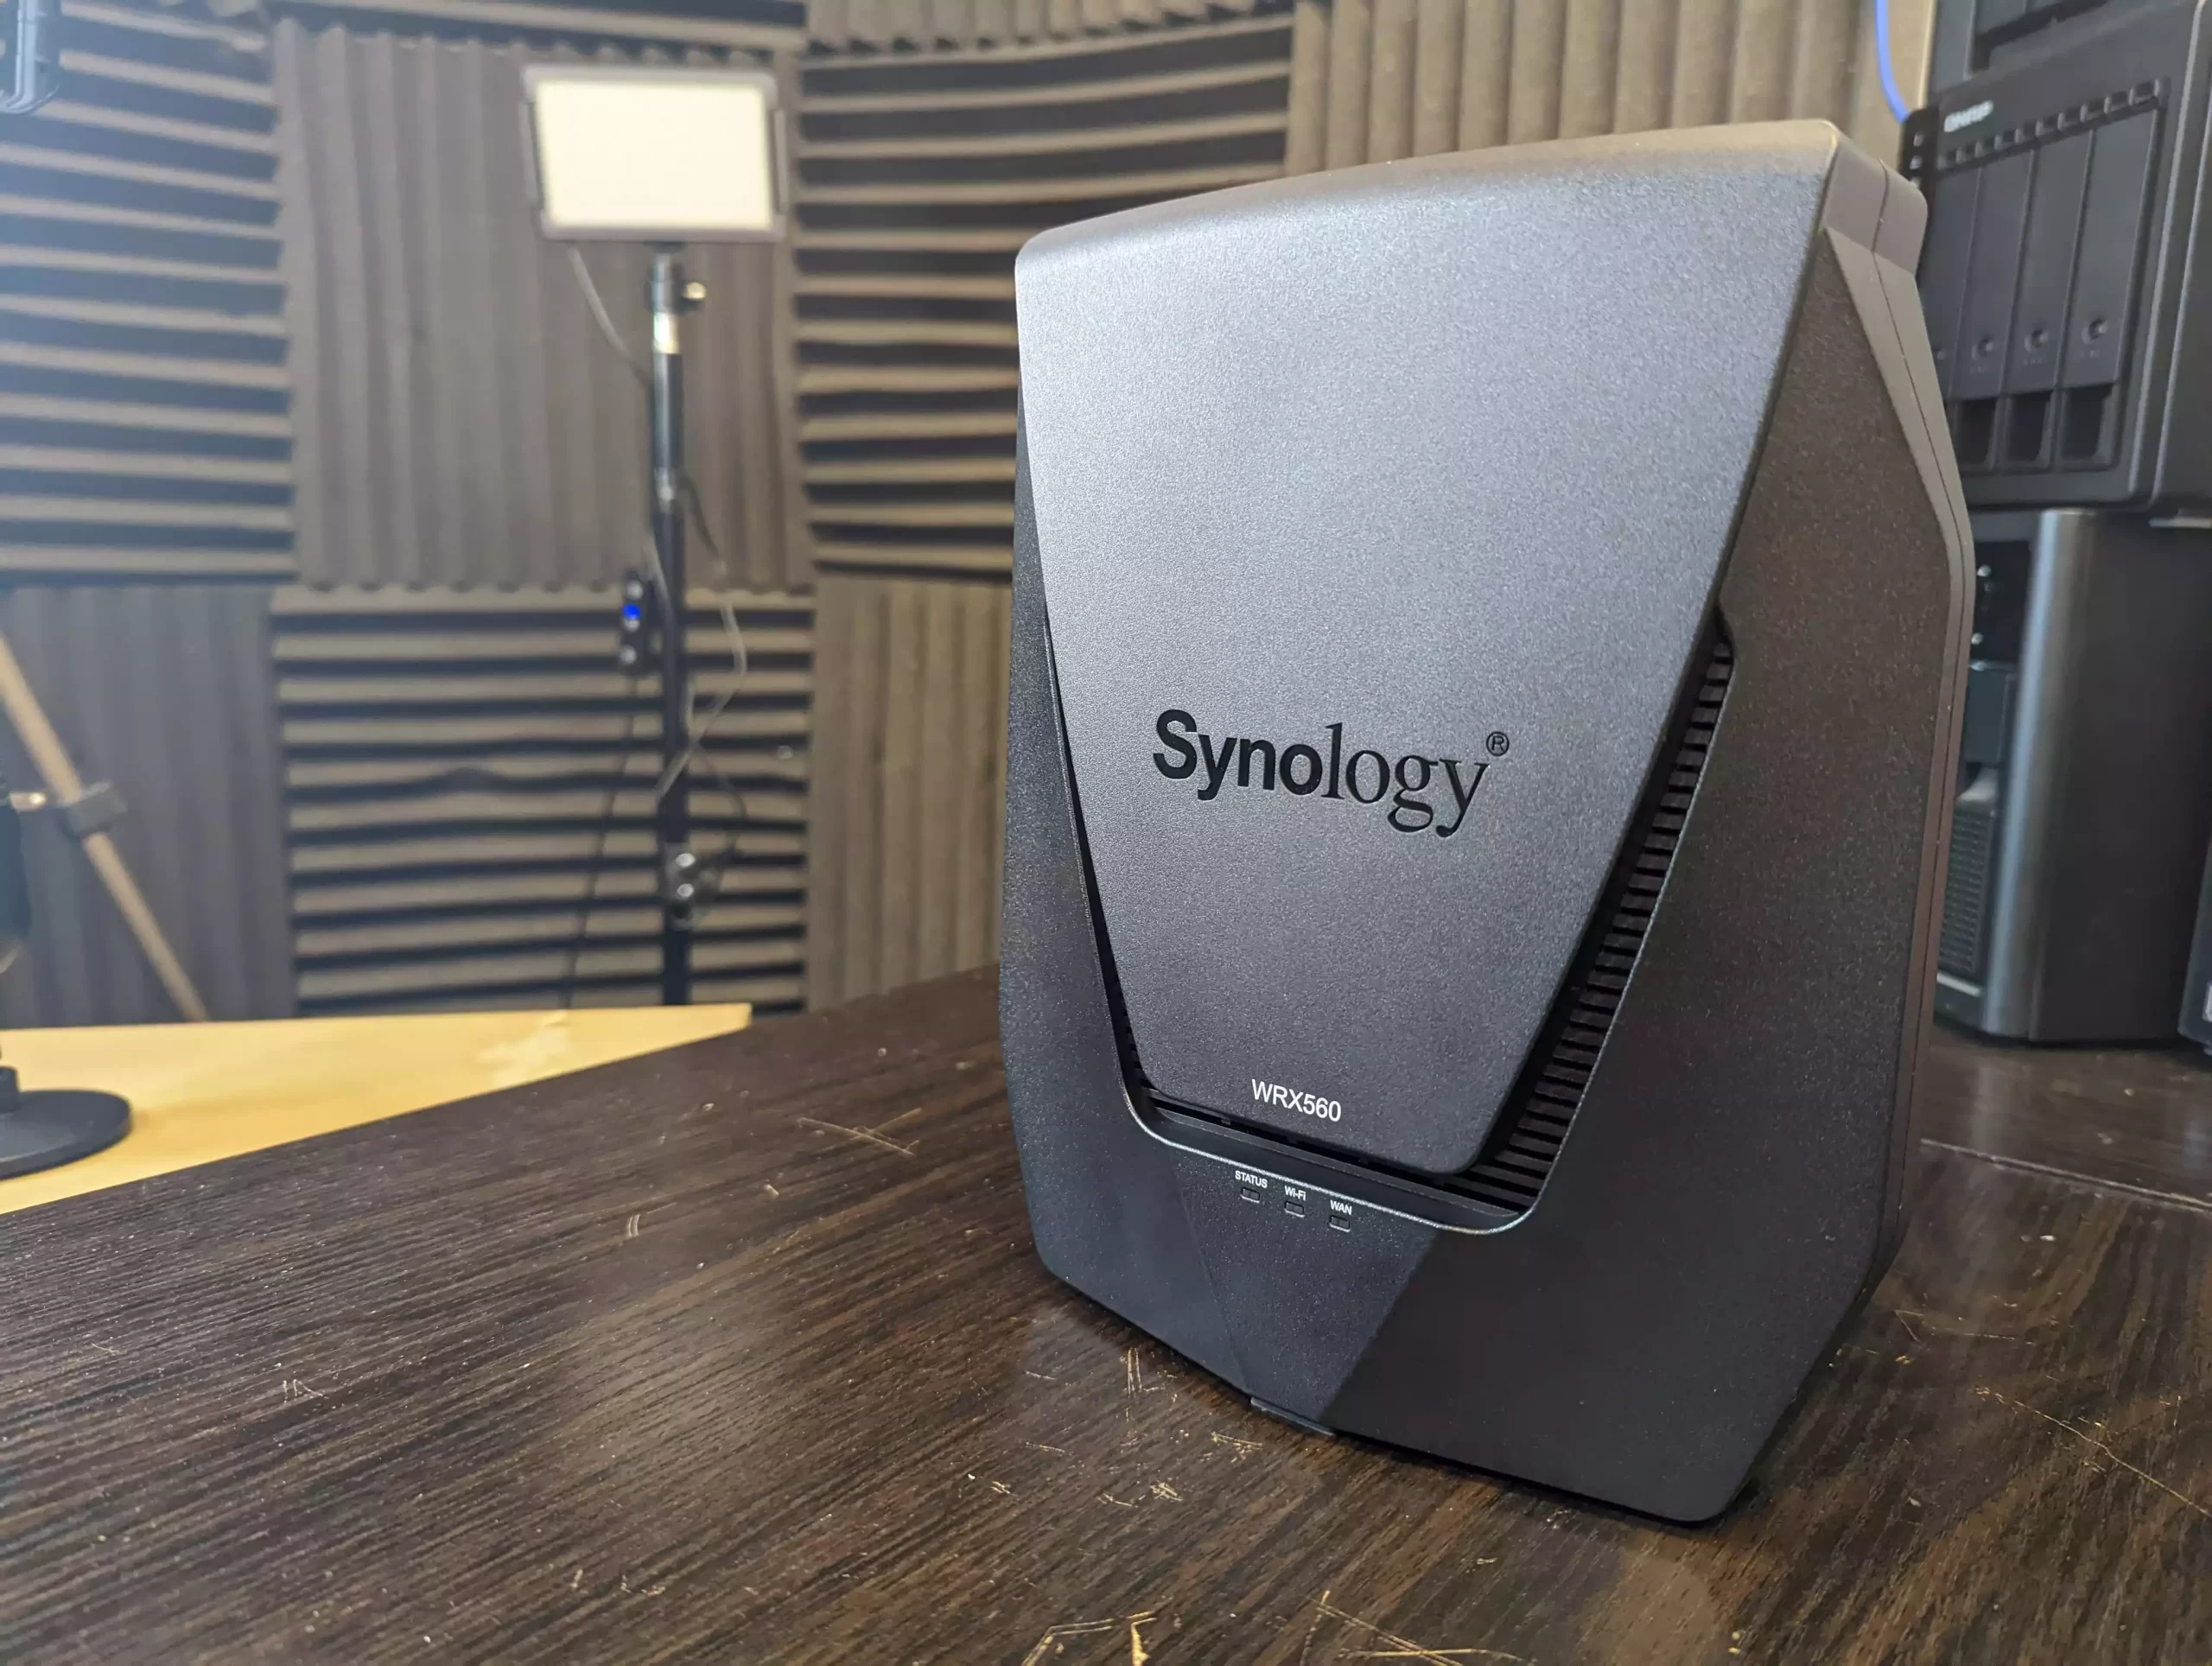 Review: Upgrading Your Wireless Network With The Synology WRX560 - GeekDad